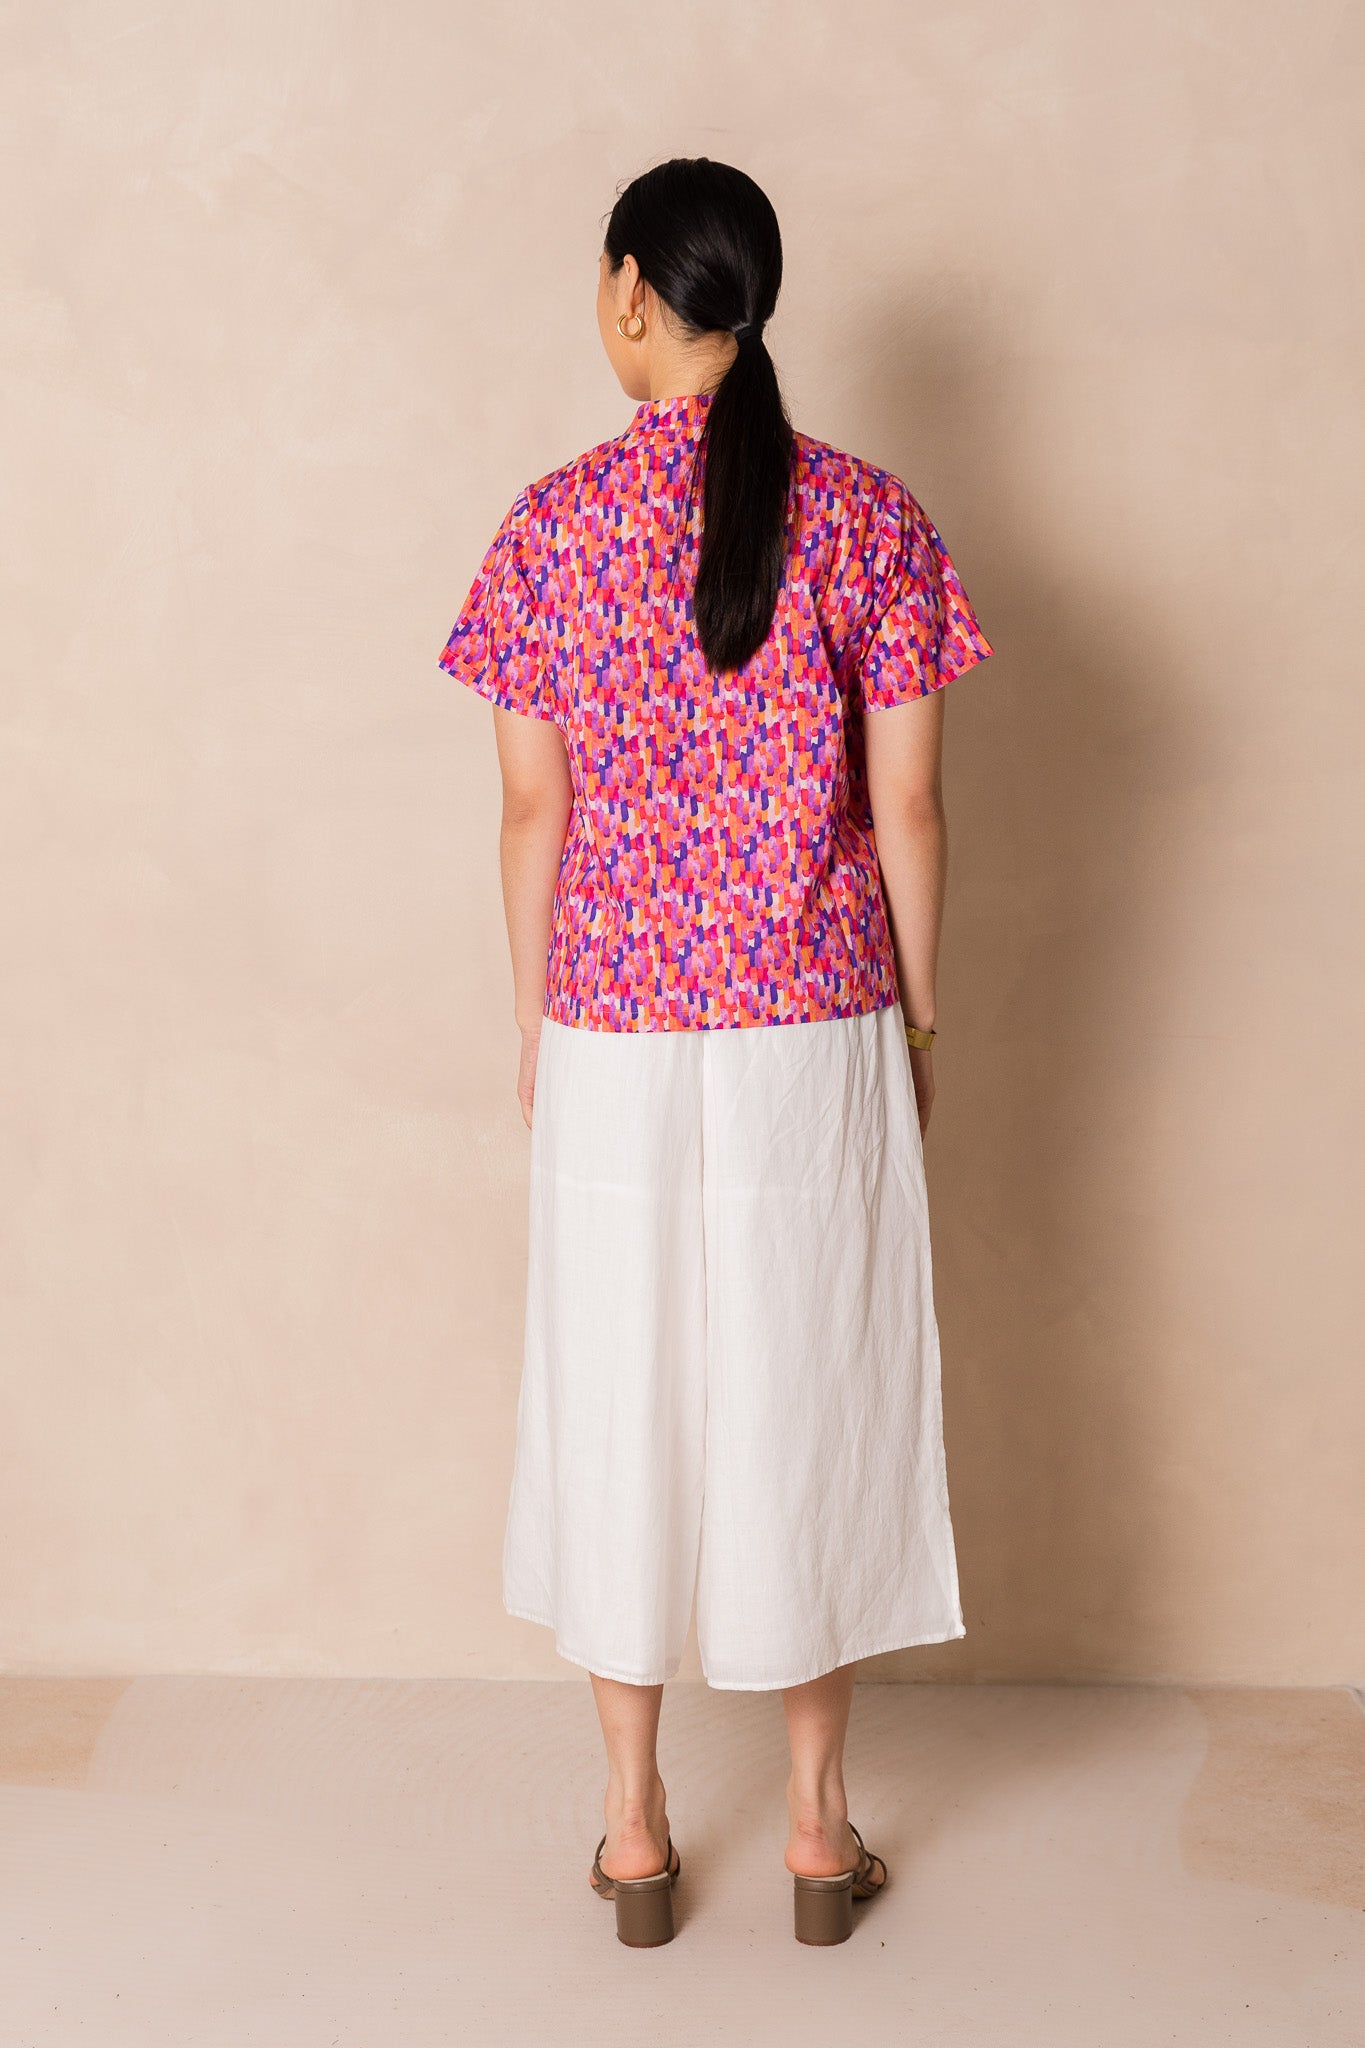 Water Colour Raindrop Print Short Sleeve Cheongsam Top, available on You Living 